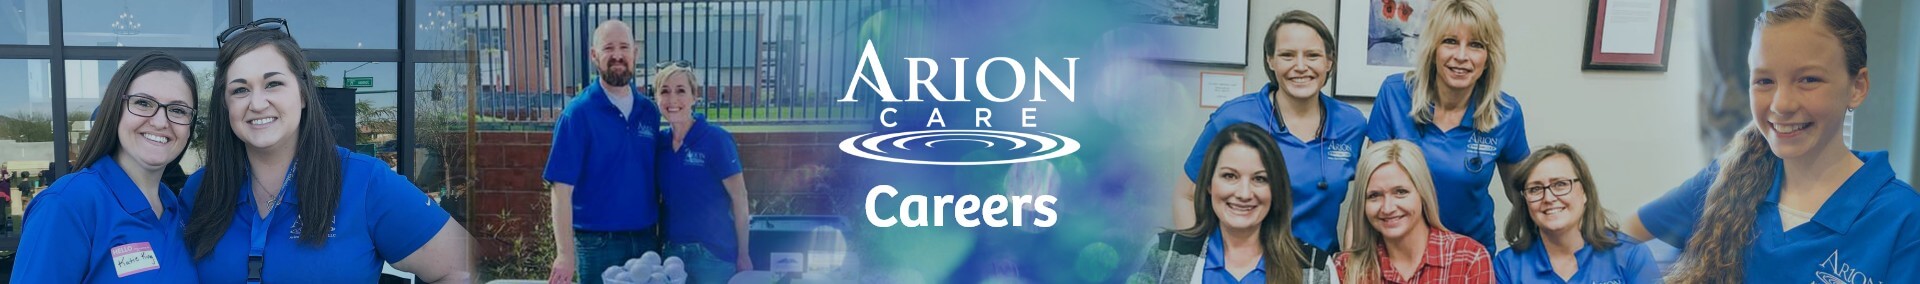 Arion Care